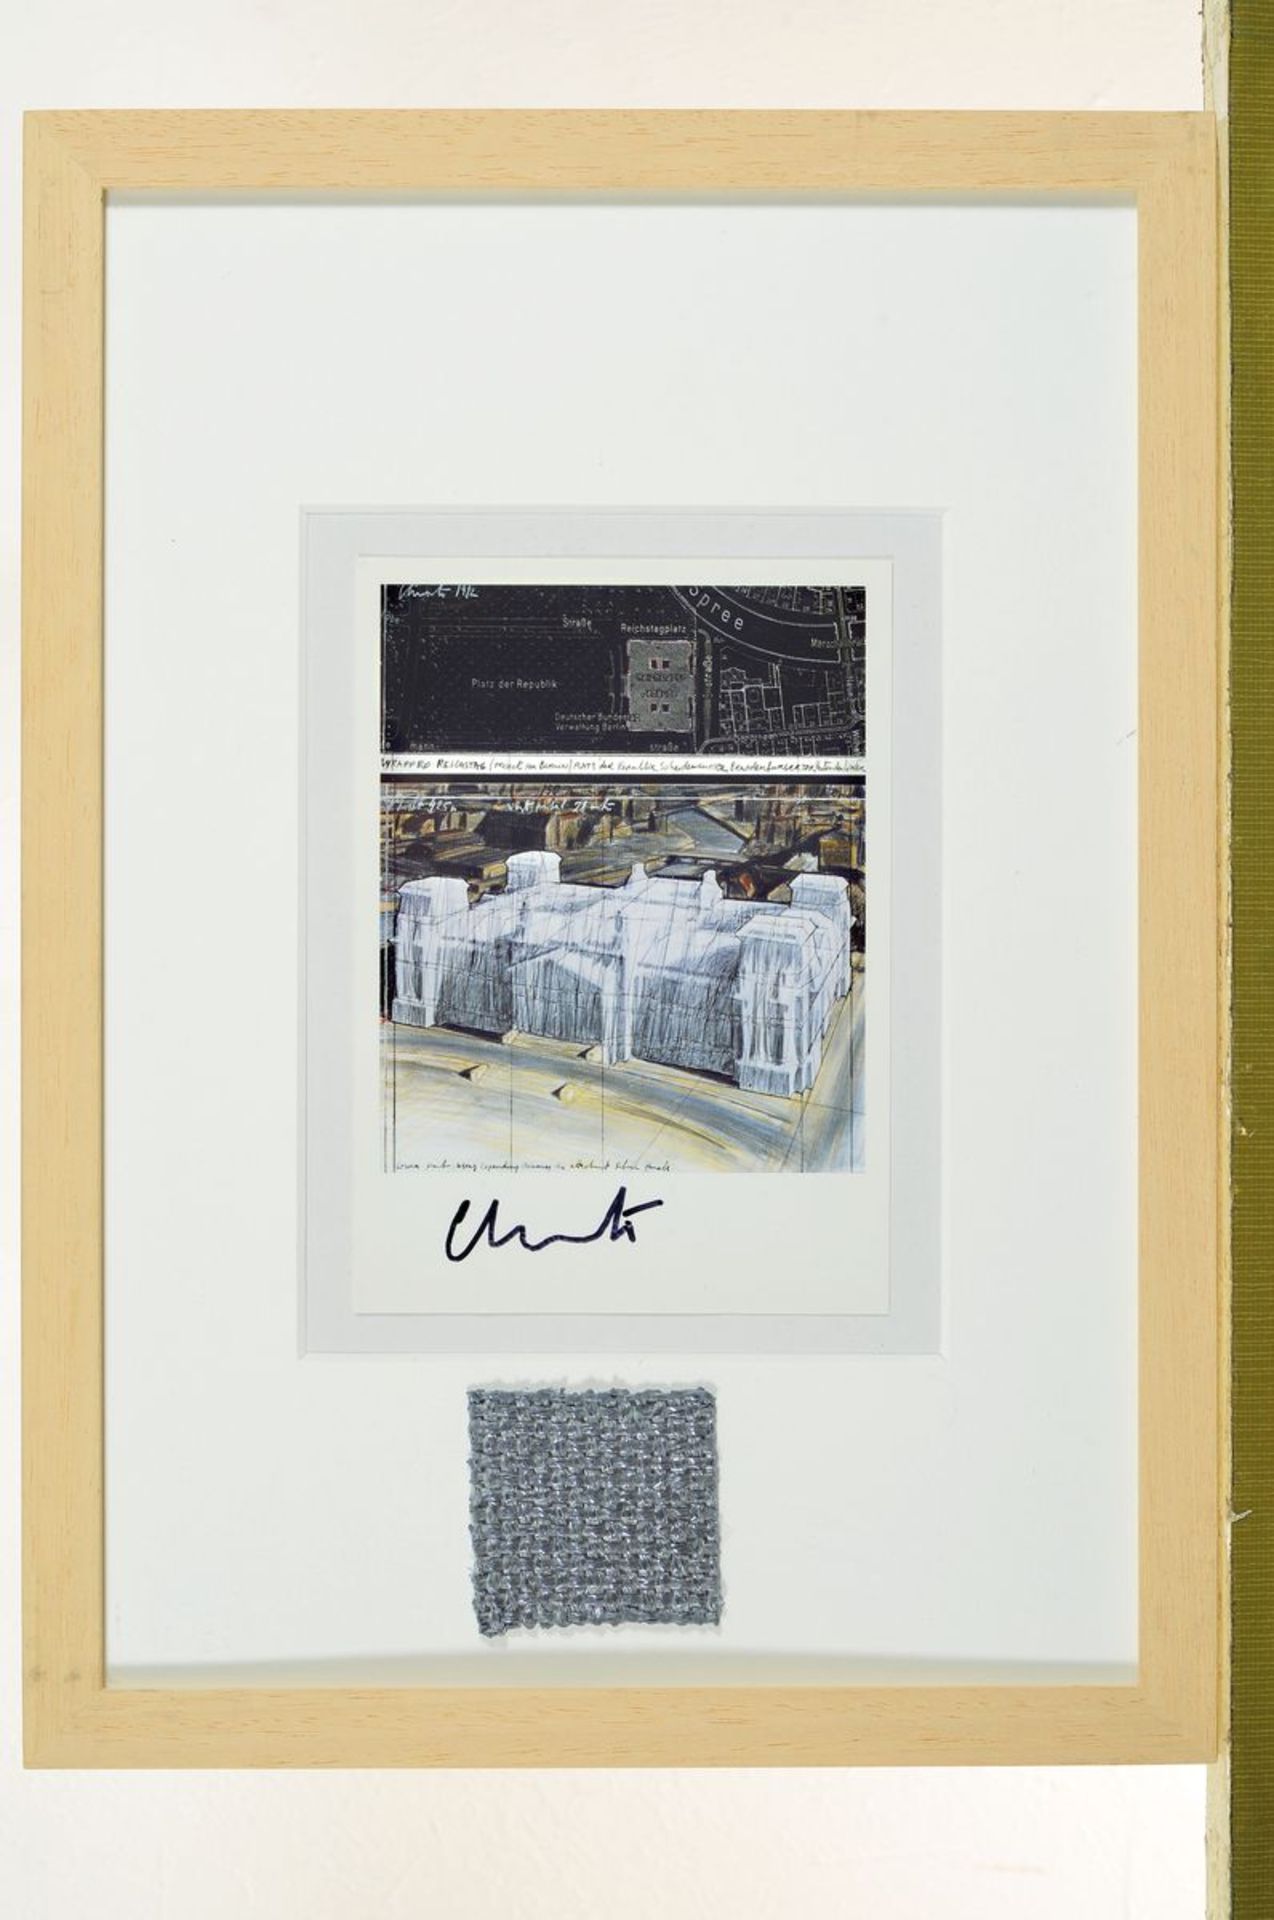 Christo and Jeanne Claude, born 1935, Multiplewith Original Stoff, signed, "Veiled Reichstag", - Image 3 of 3